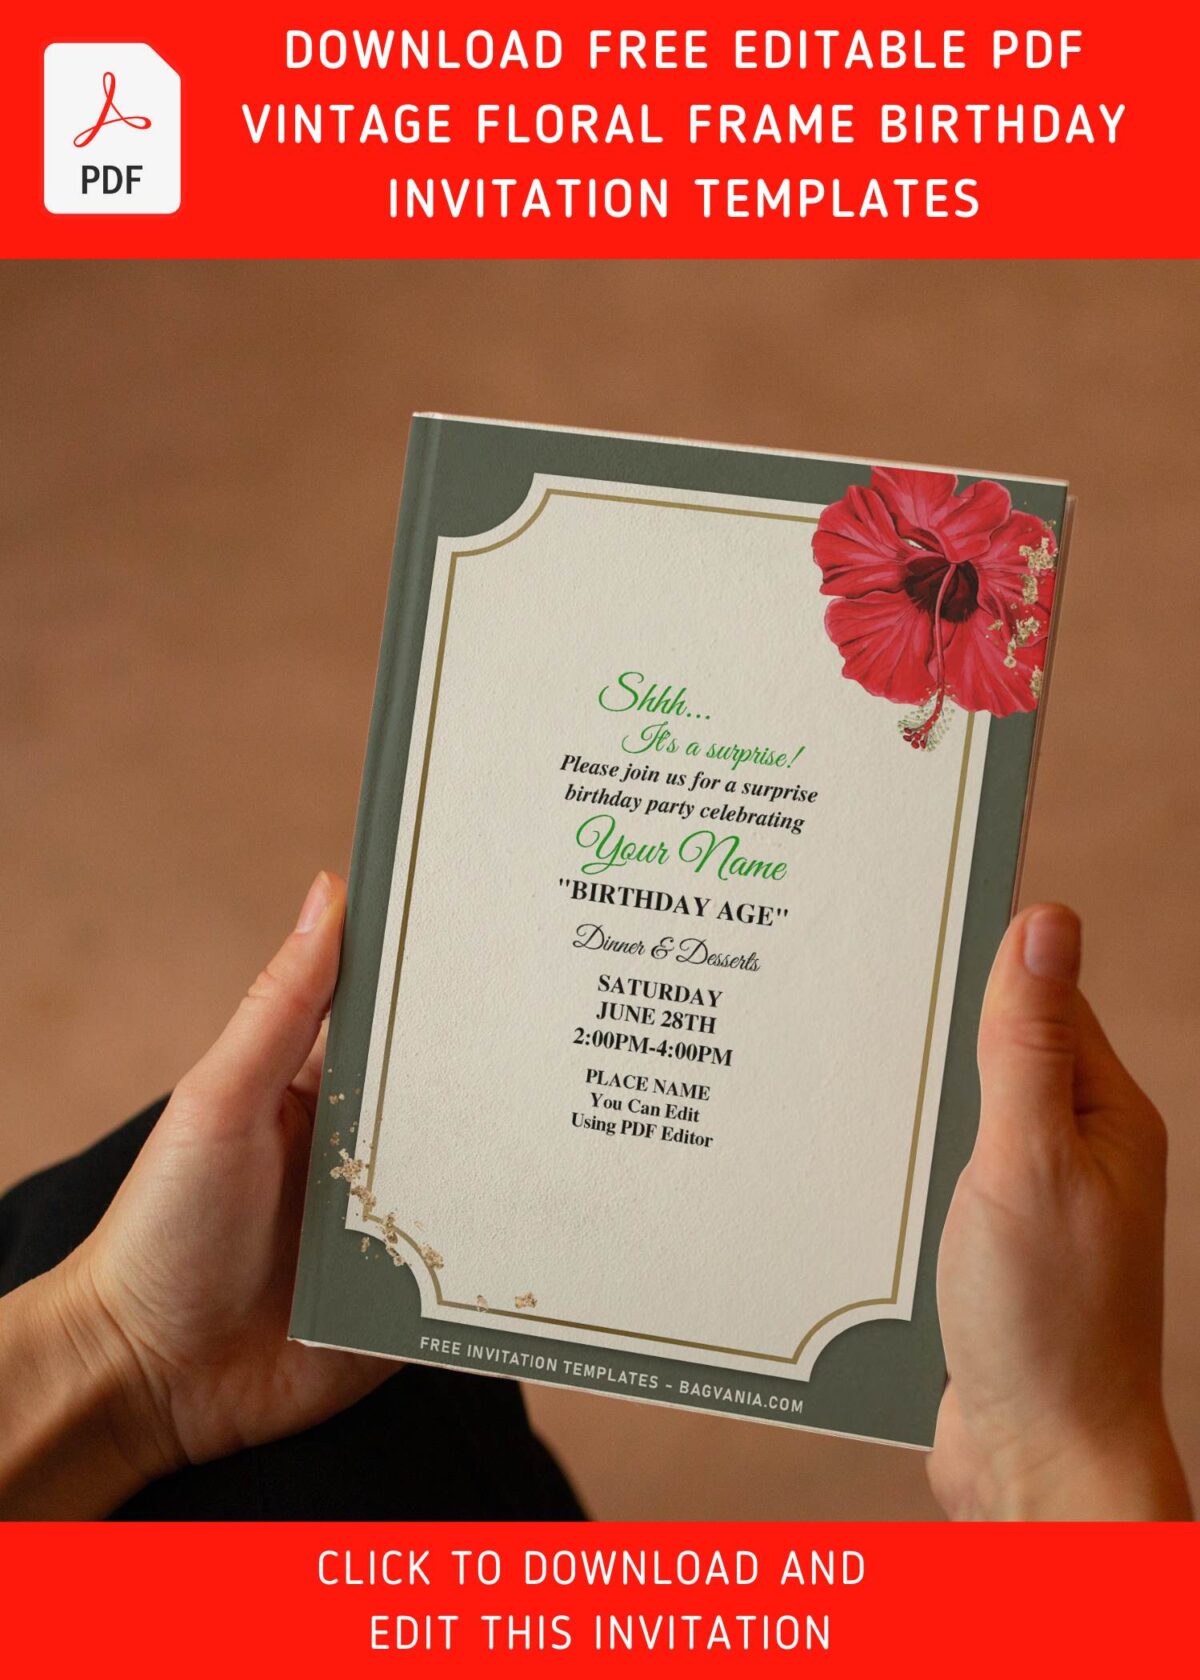 (Free Editable PDF) Lovely Floral Frame Birthday Invitation Templates with alluring red calla lily